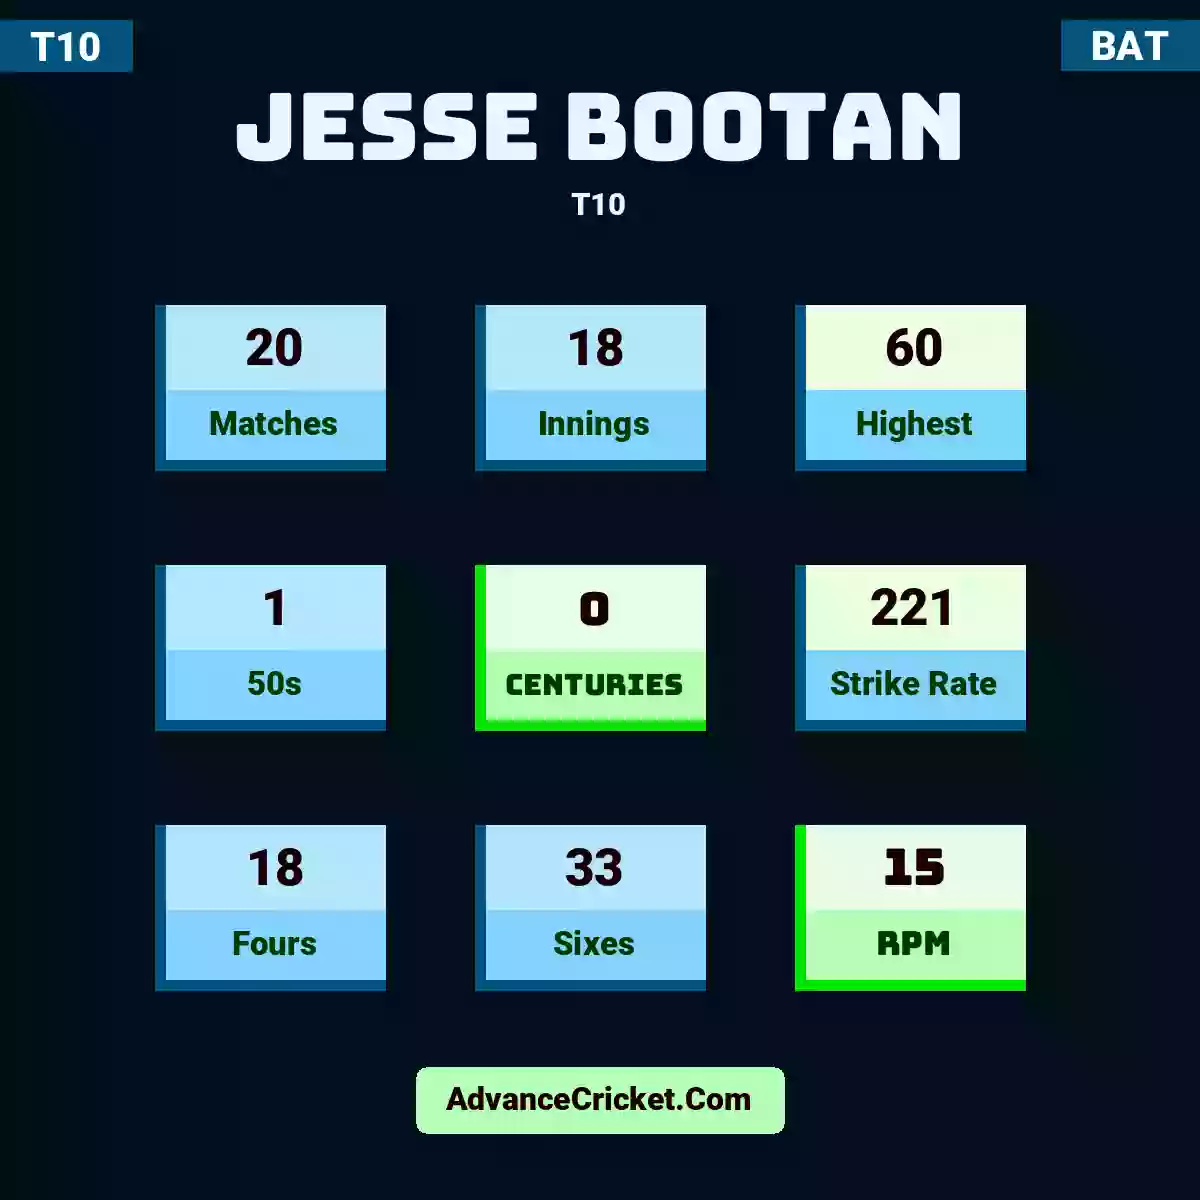 Jesse Bootan T10 , Jesse Bootan played 20 matches, scored 60 runs as highest, 1 half-centuries, and 0 centuries, with a strike rate of 221. j.bootan hit 18 fours and 33 sixes, with an RPM of 15.